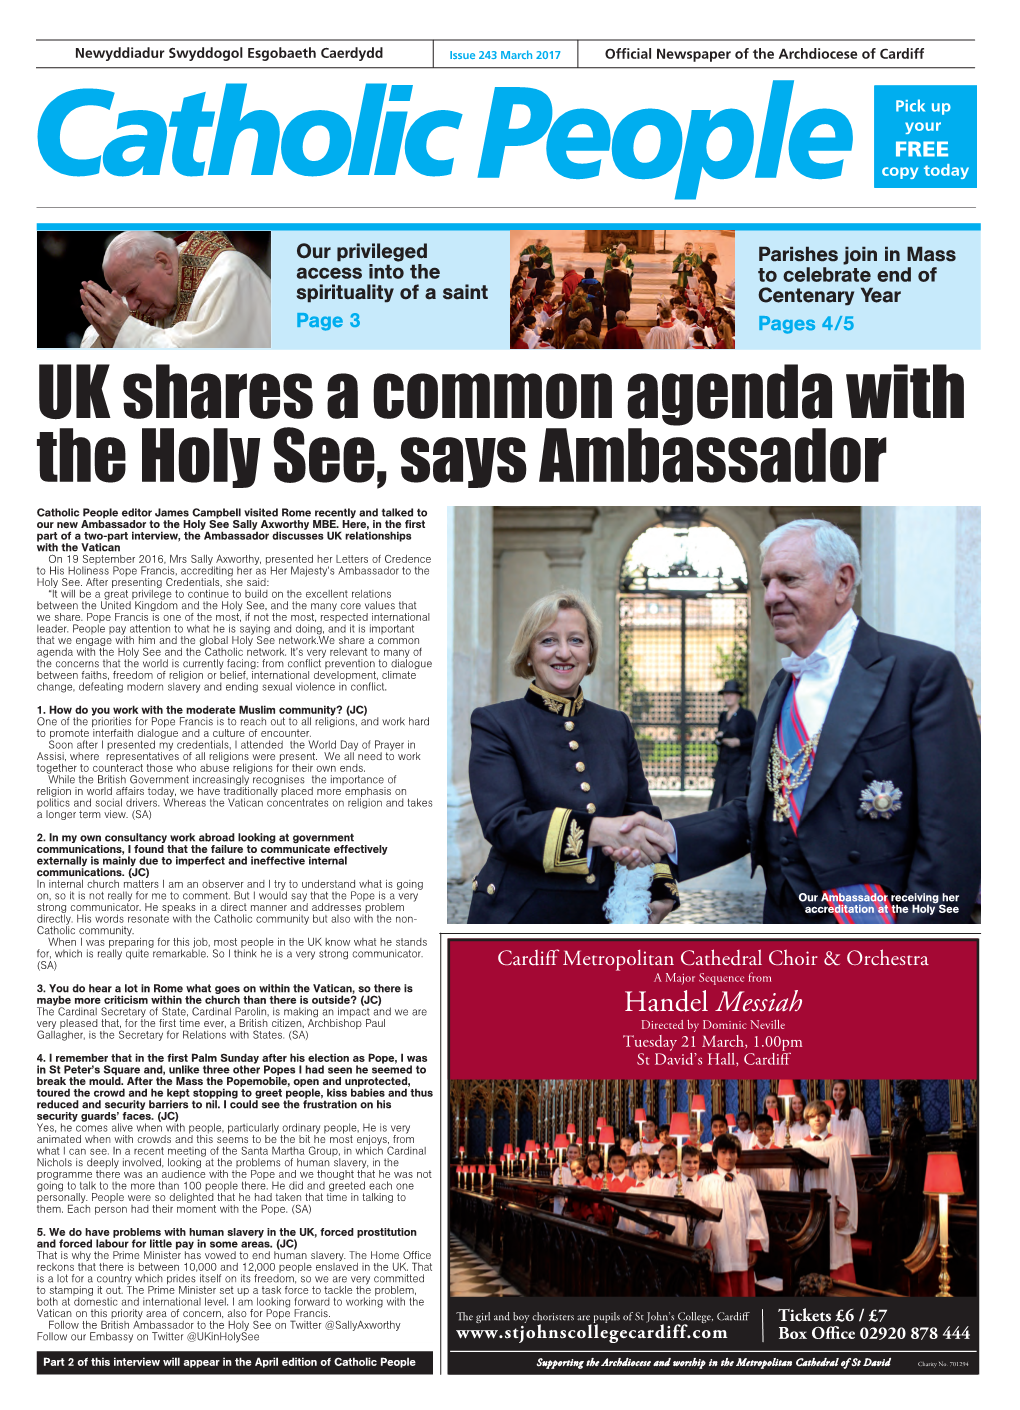 UK Shares a Common Agenda with the Holy See, Says Ambassador